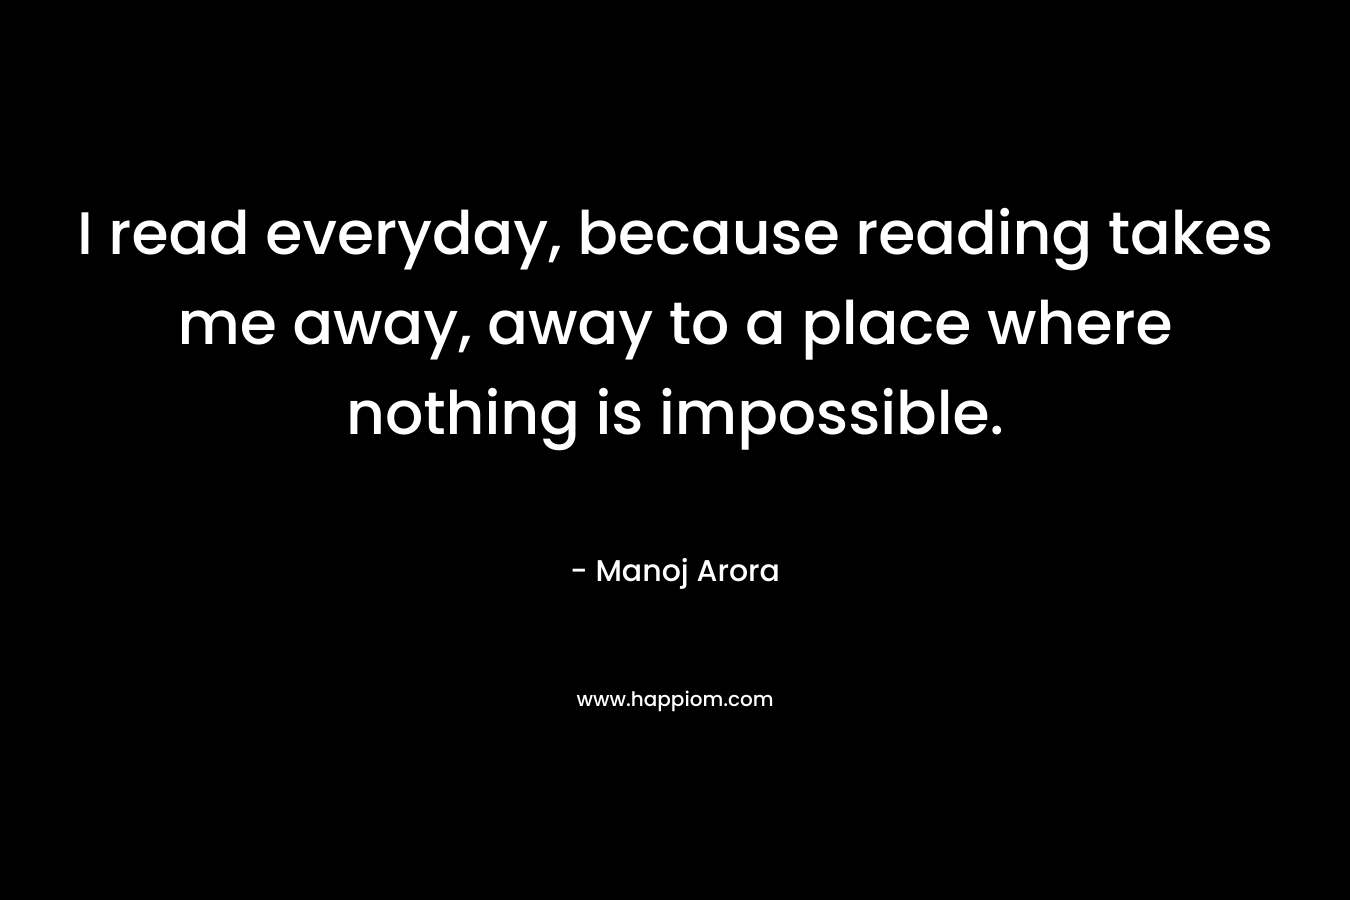 I read everyday, because reading takes me away, away to a place where nothing is impossible.